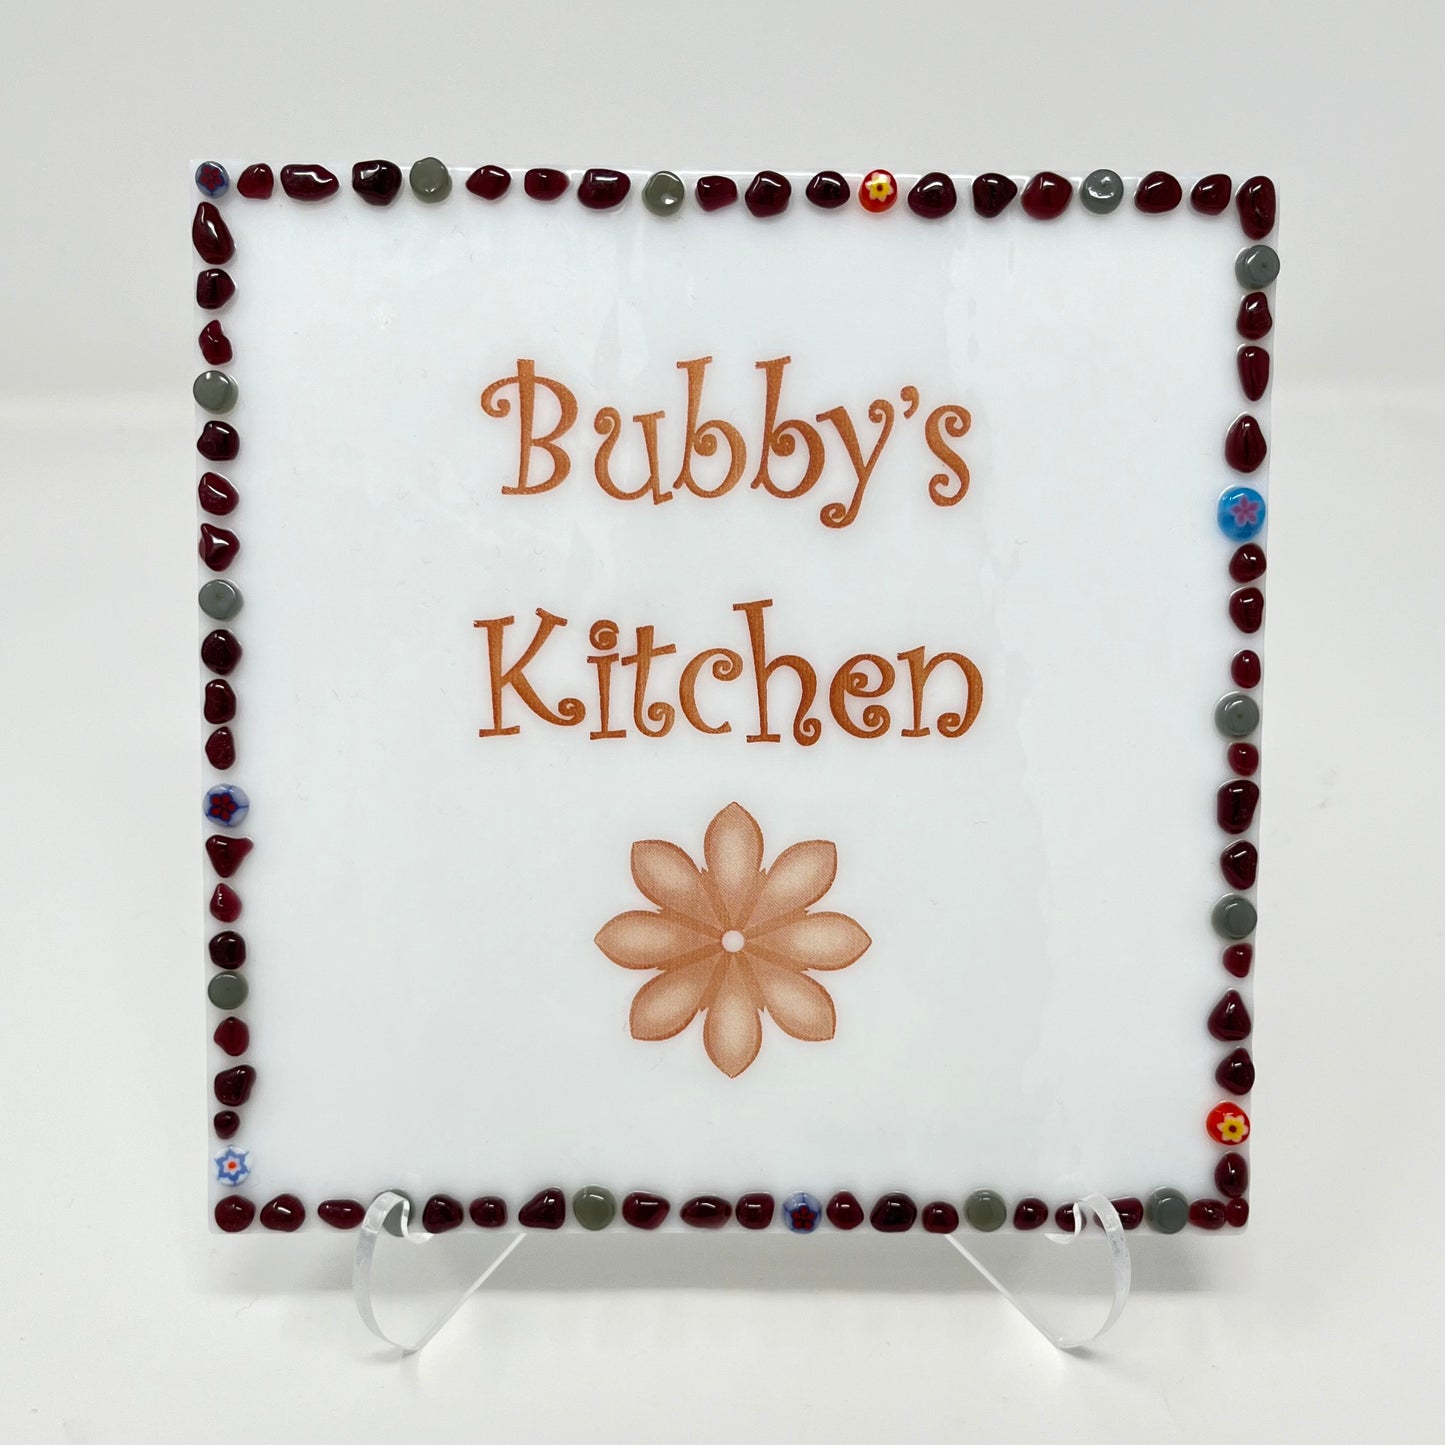 Name Plaque/ Bubby’s Kitchen, Cranberry Pink and Gray